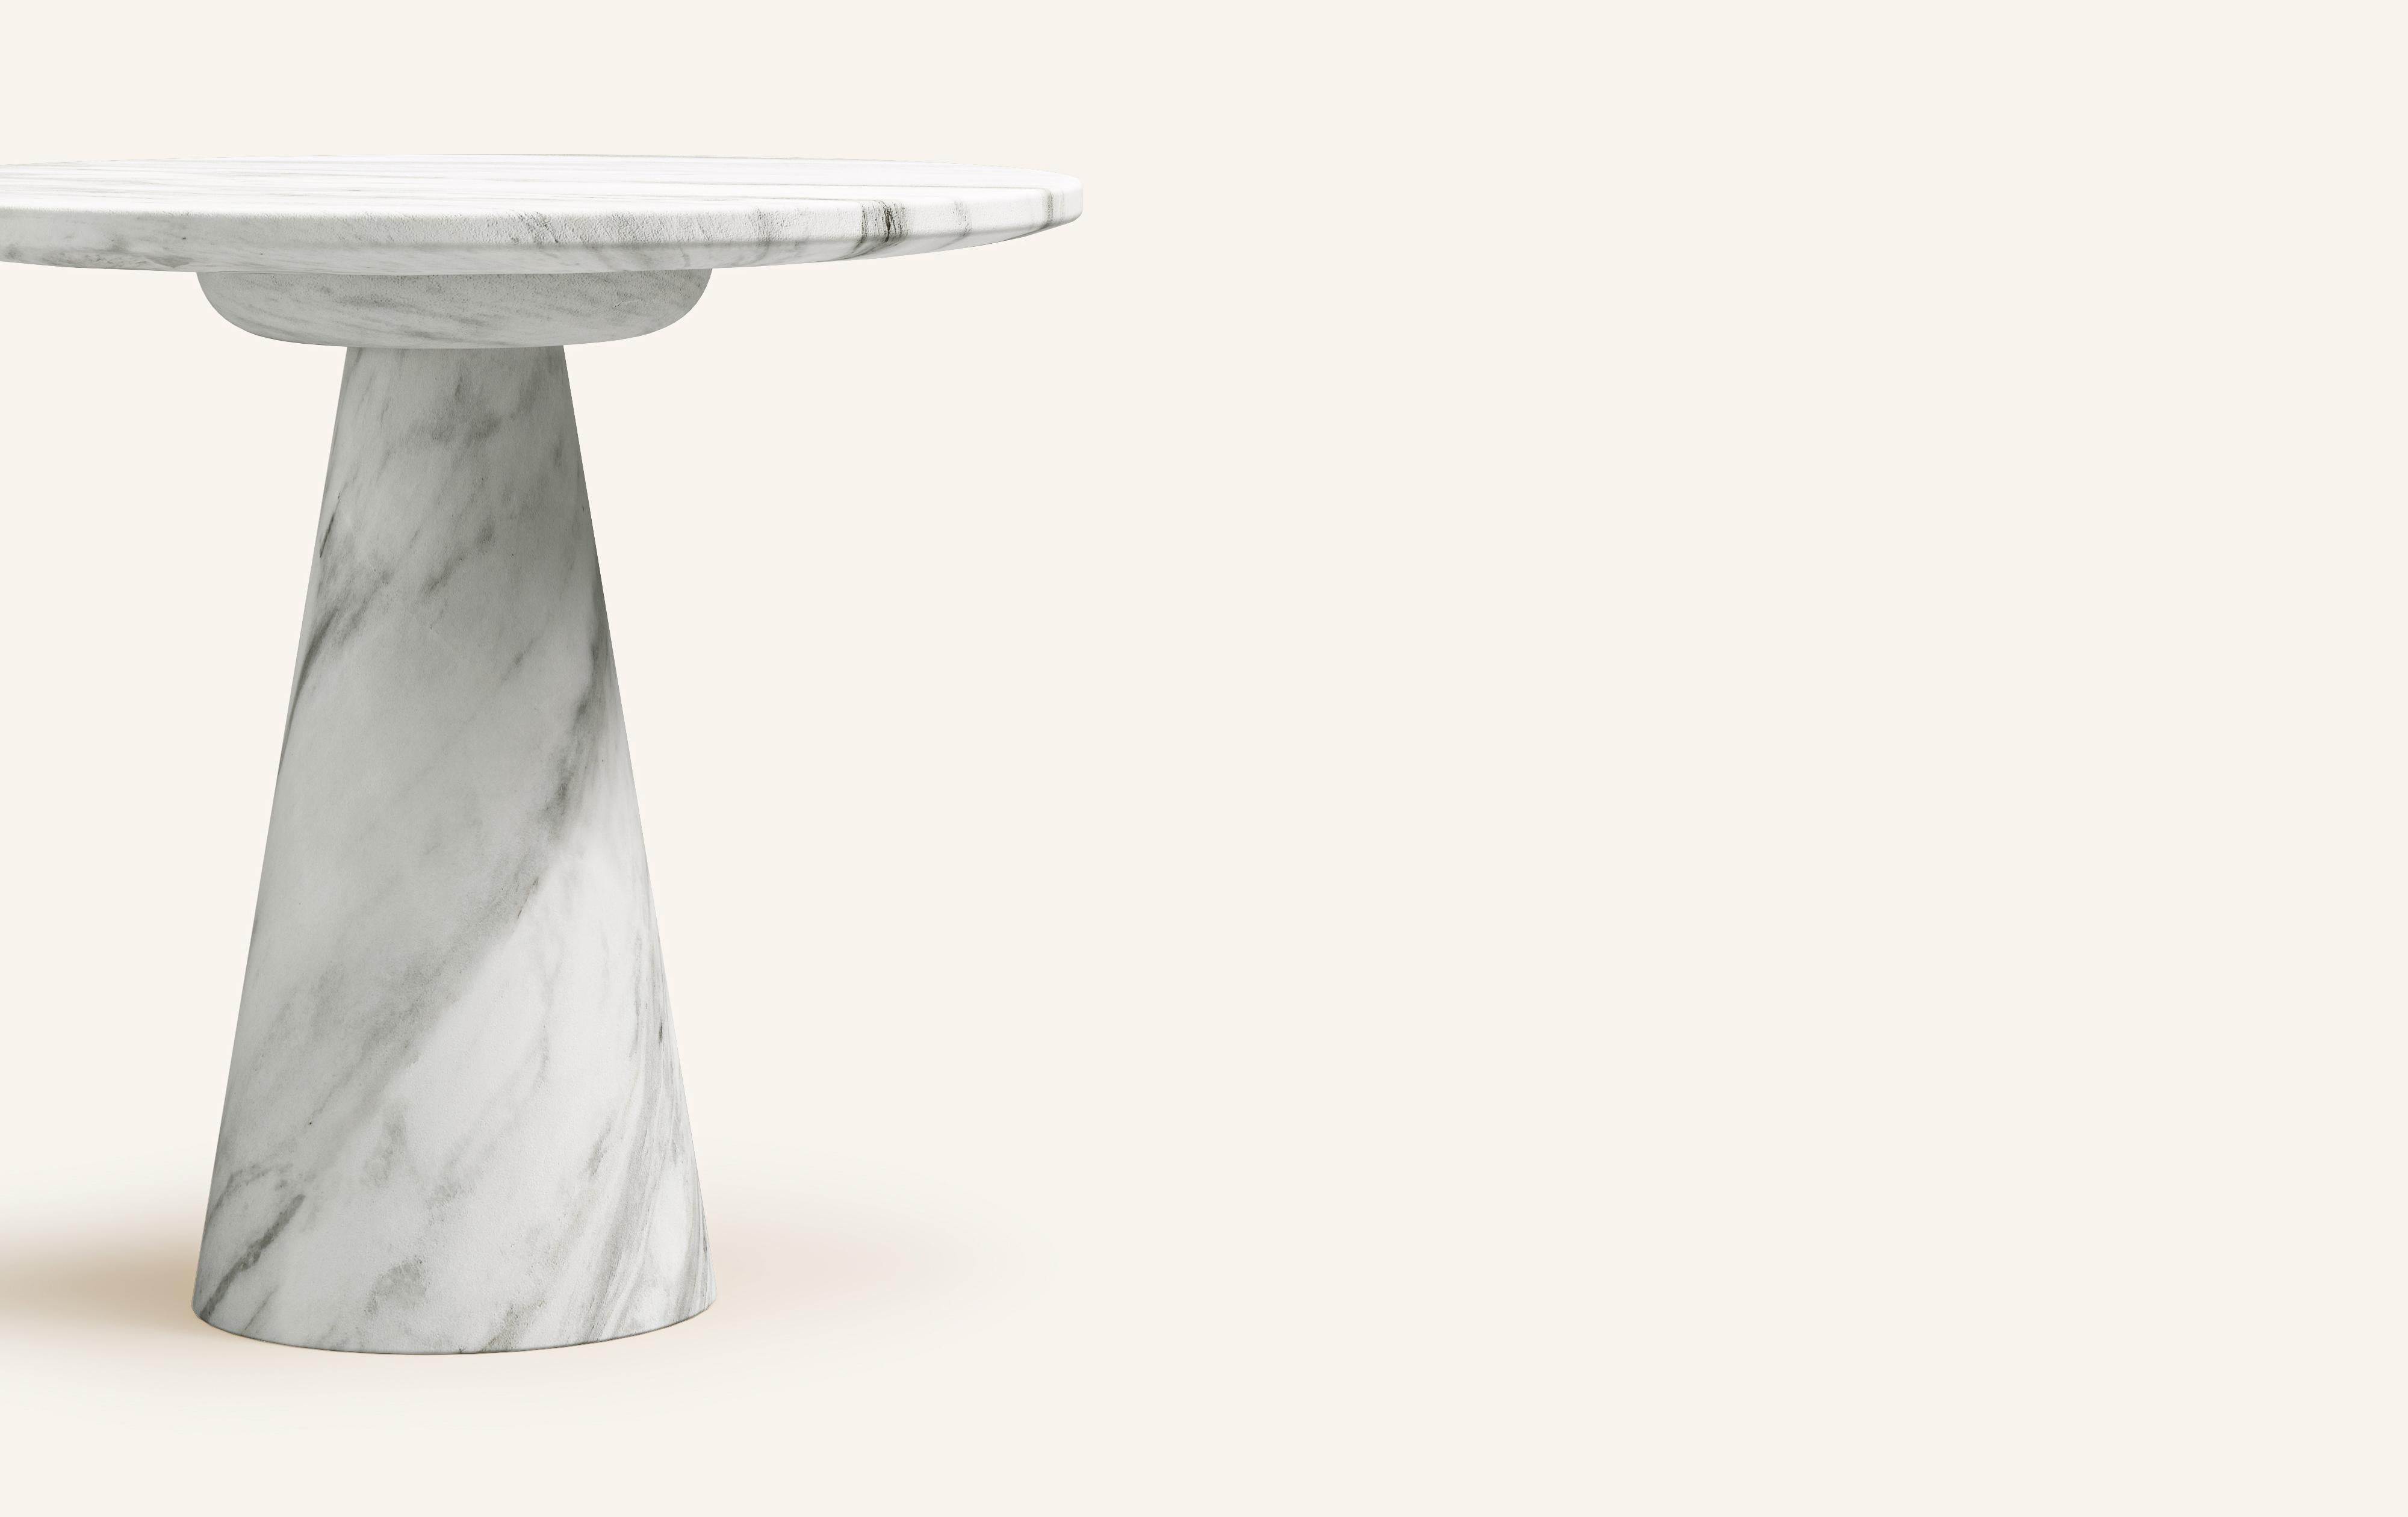 Organic Modern FORM(LA) Cono Round Side Table 18”L x 18”W x 21”H Volakas White Marble For Sale